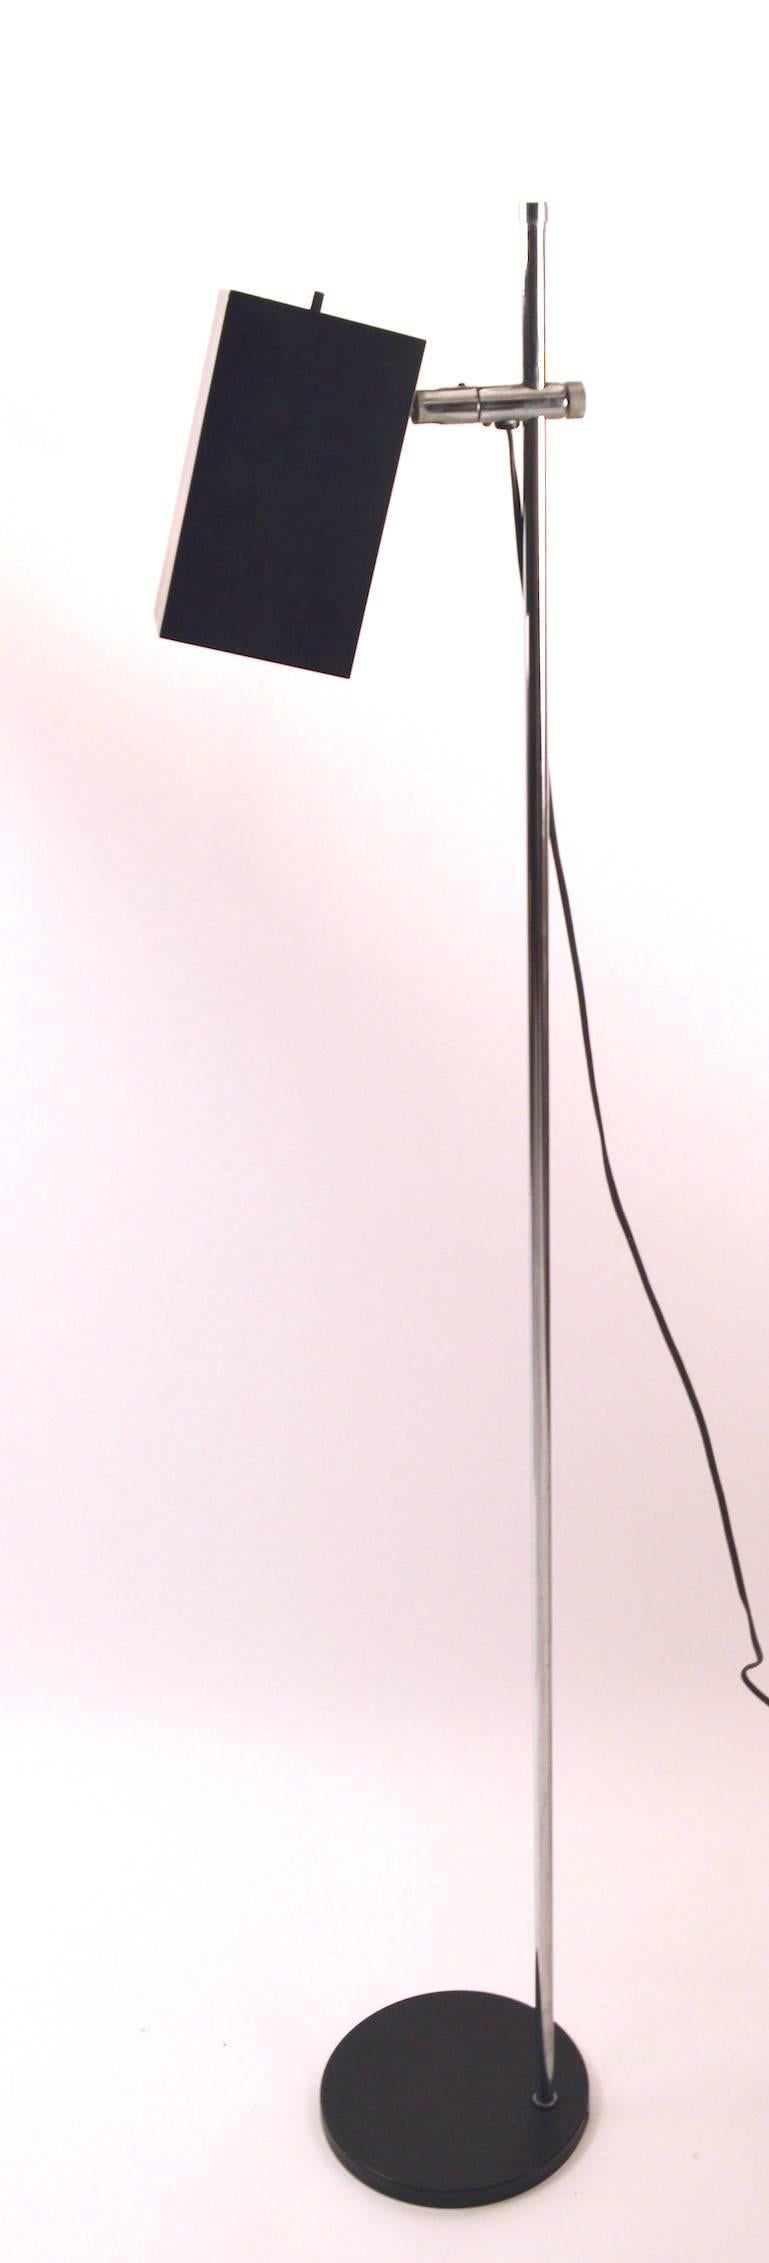 Black and chrome adjustable floor lamp, by Sonneman for Kovacs. The squared hood shade (7